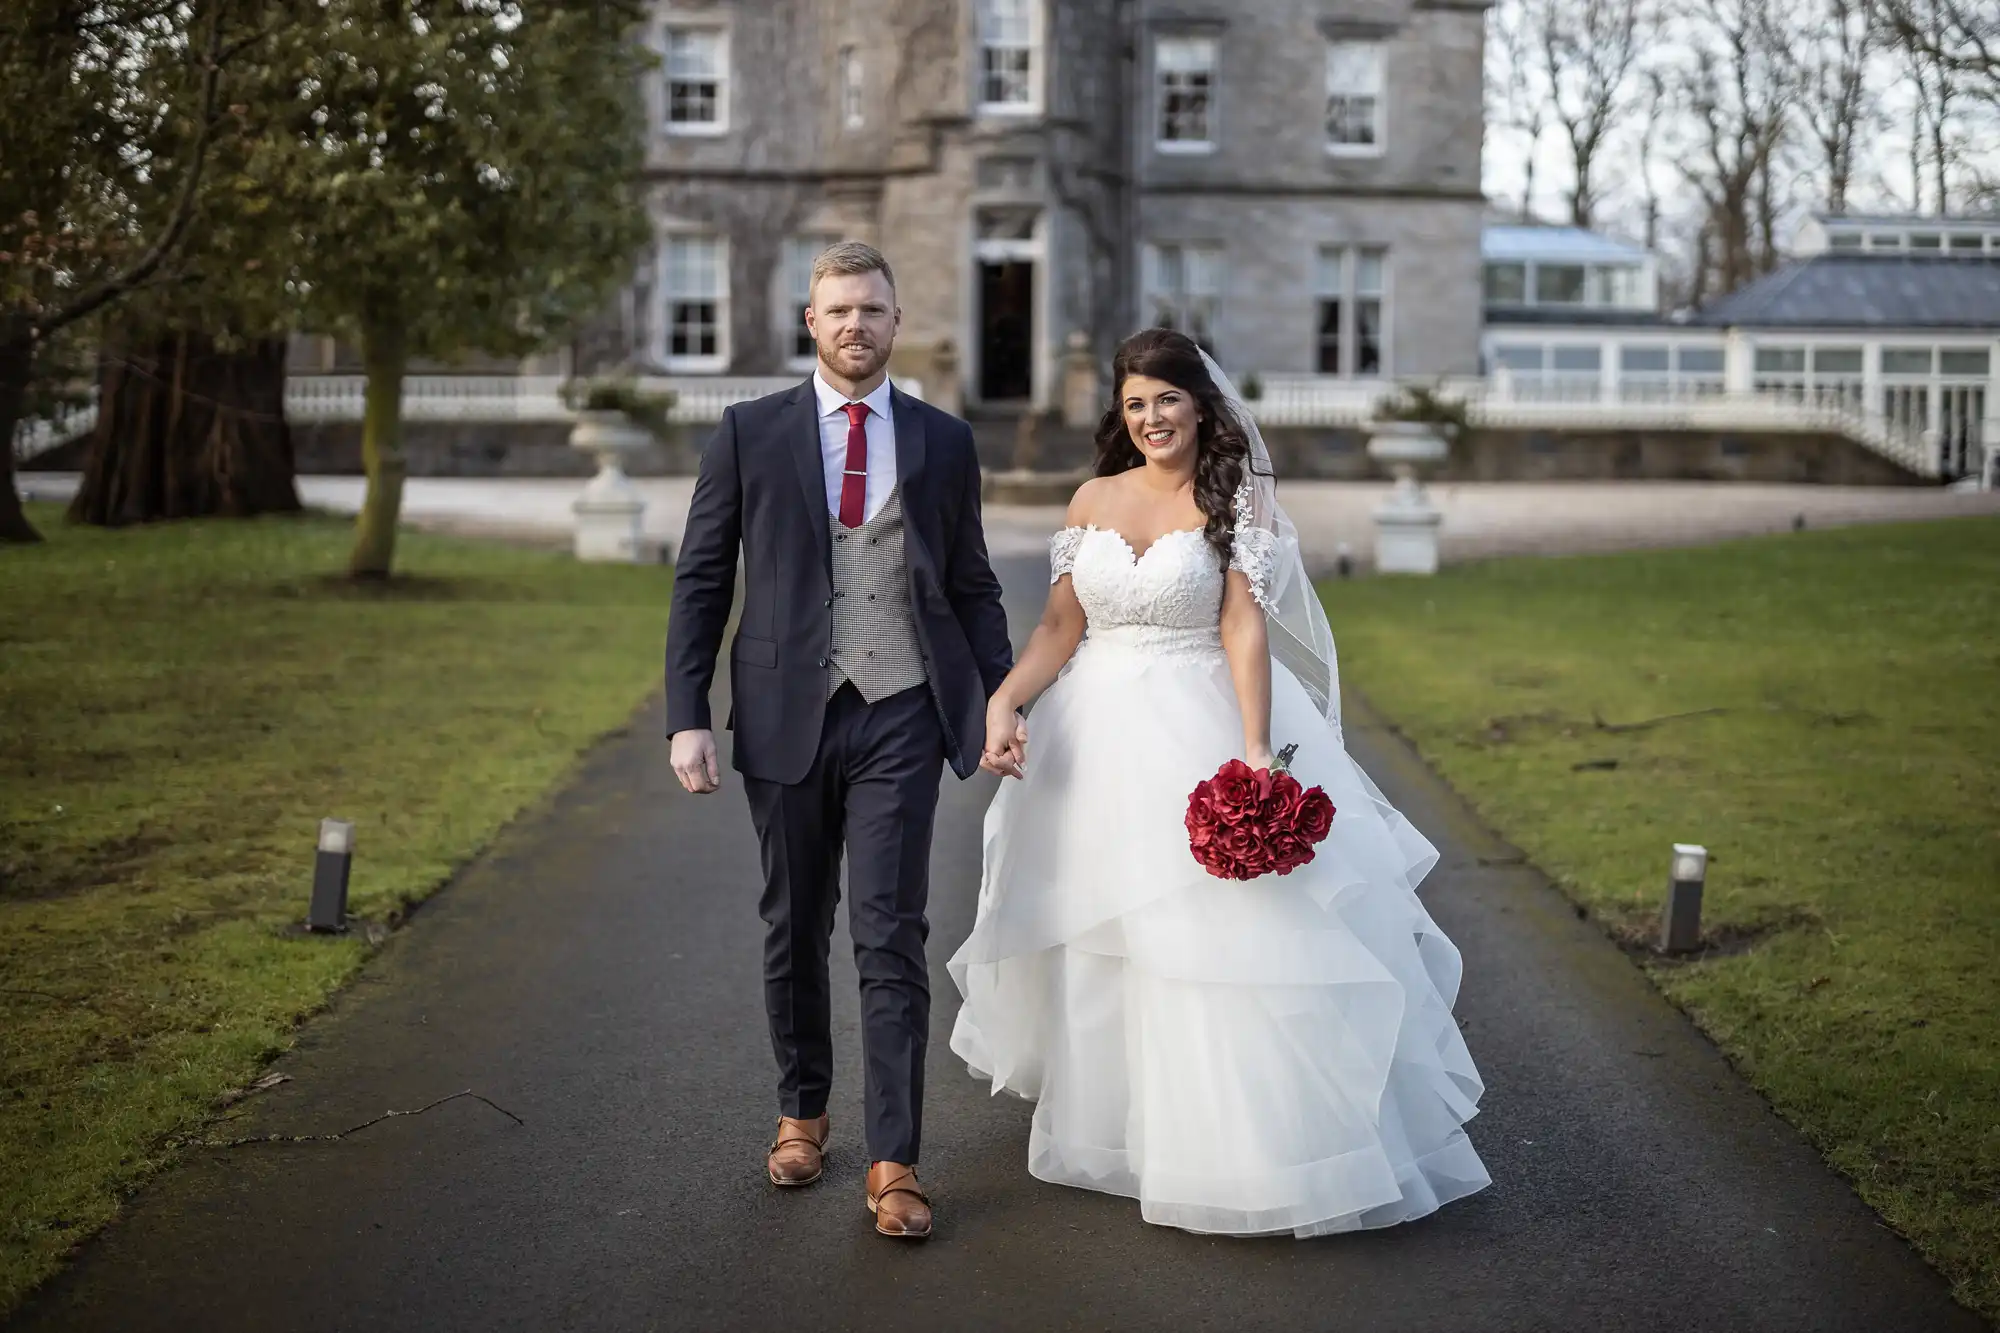 Carlowrie Castle wedding photos: A bride and groom walk hand-in-hand on a path in front of a large stone building. The bride is in a white dress holding red flowers; the groom is in a dark suit with a gray vest.